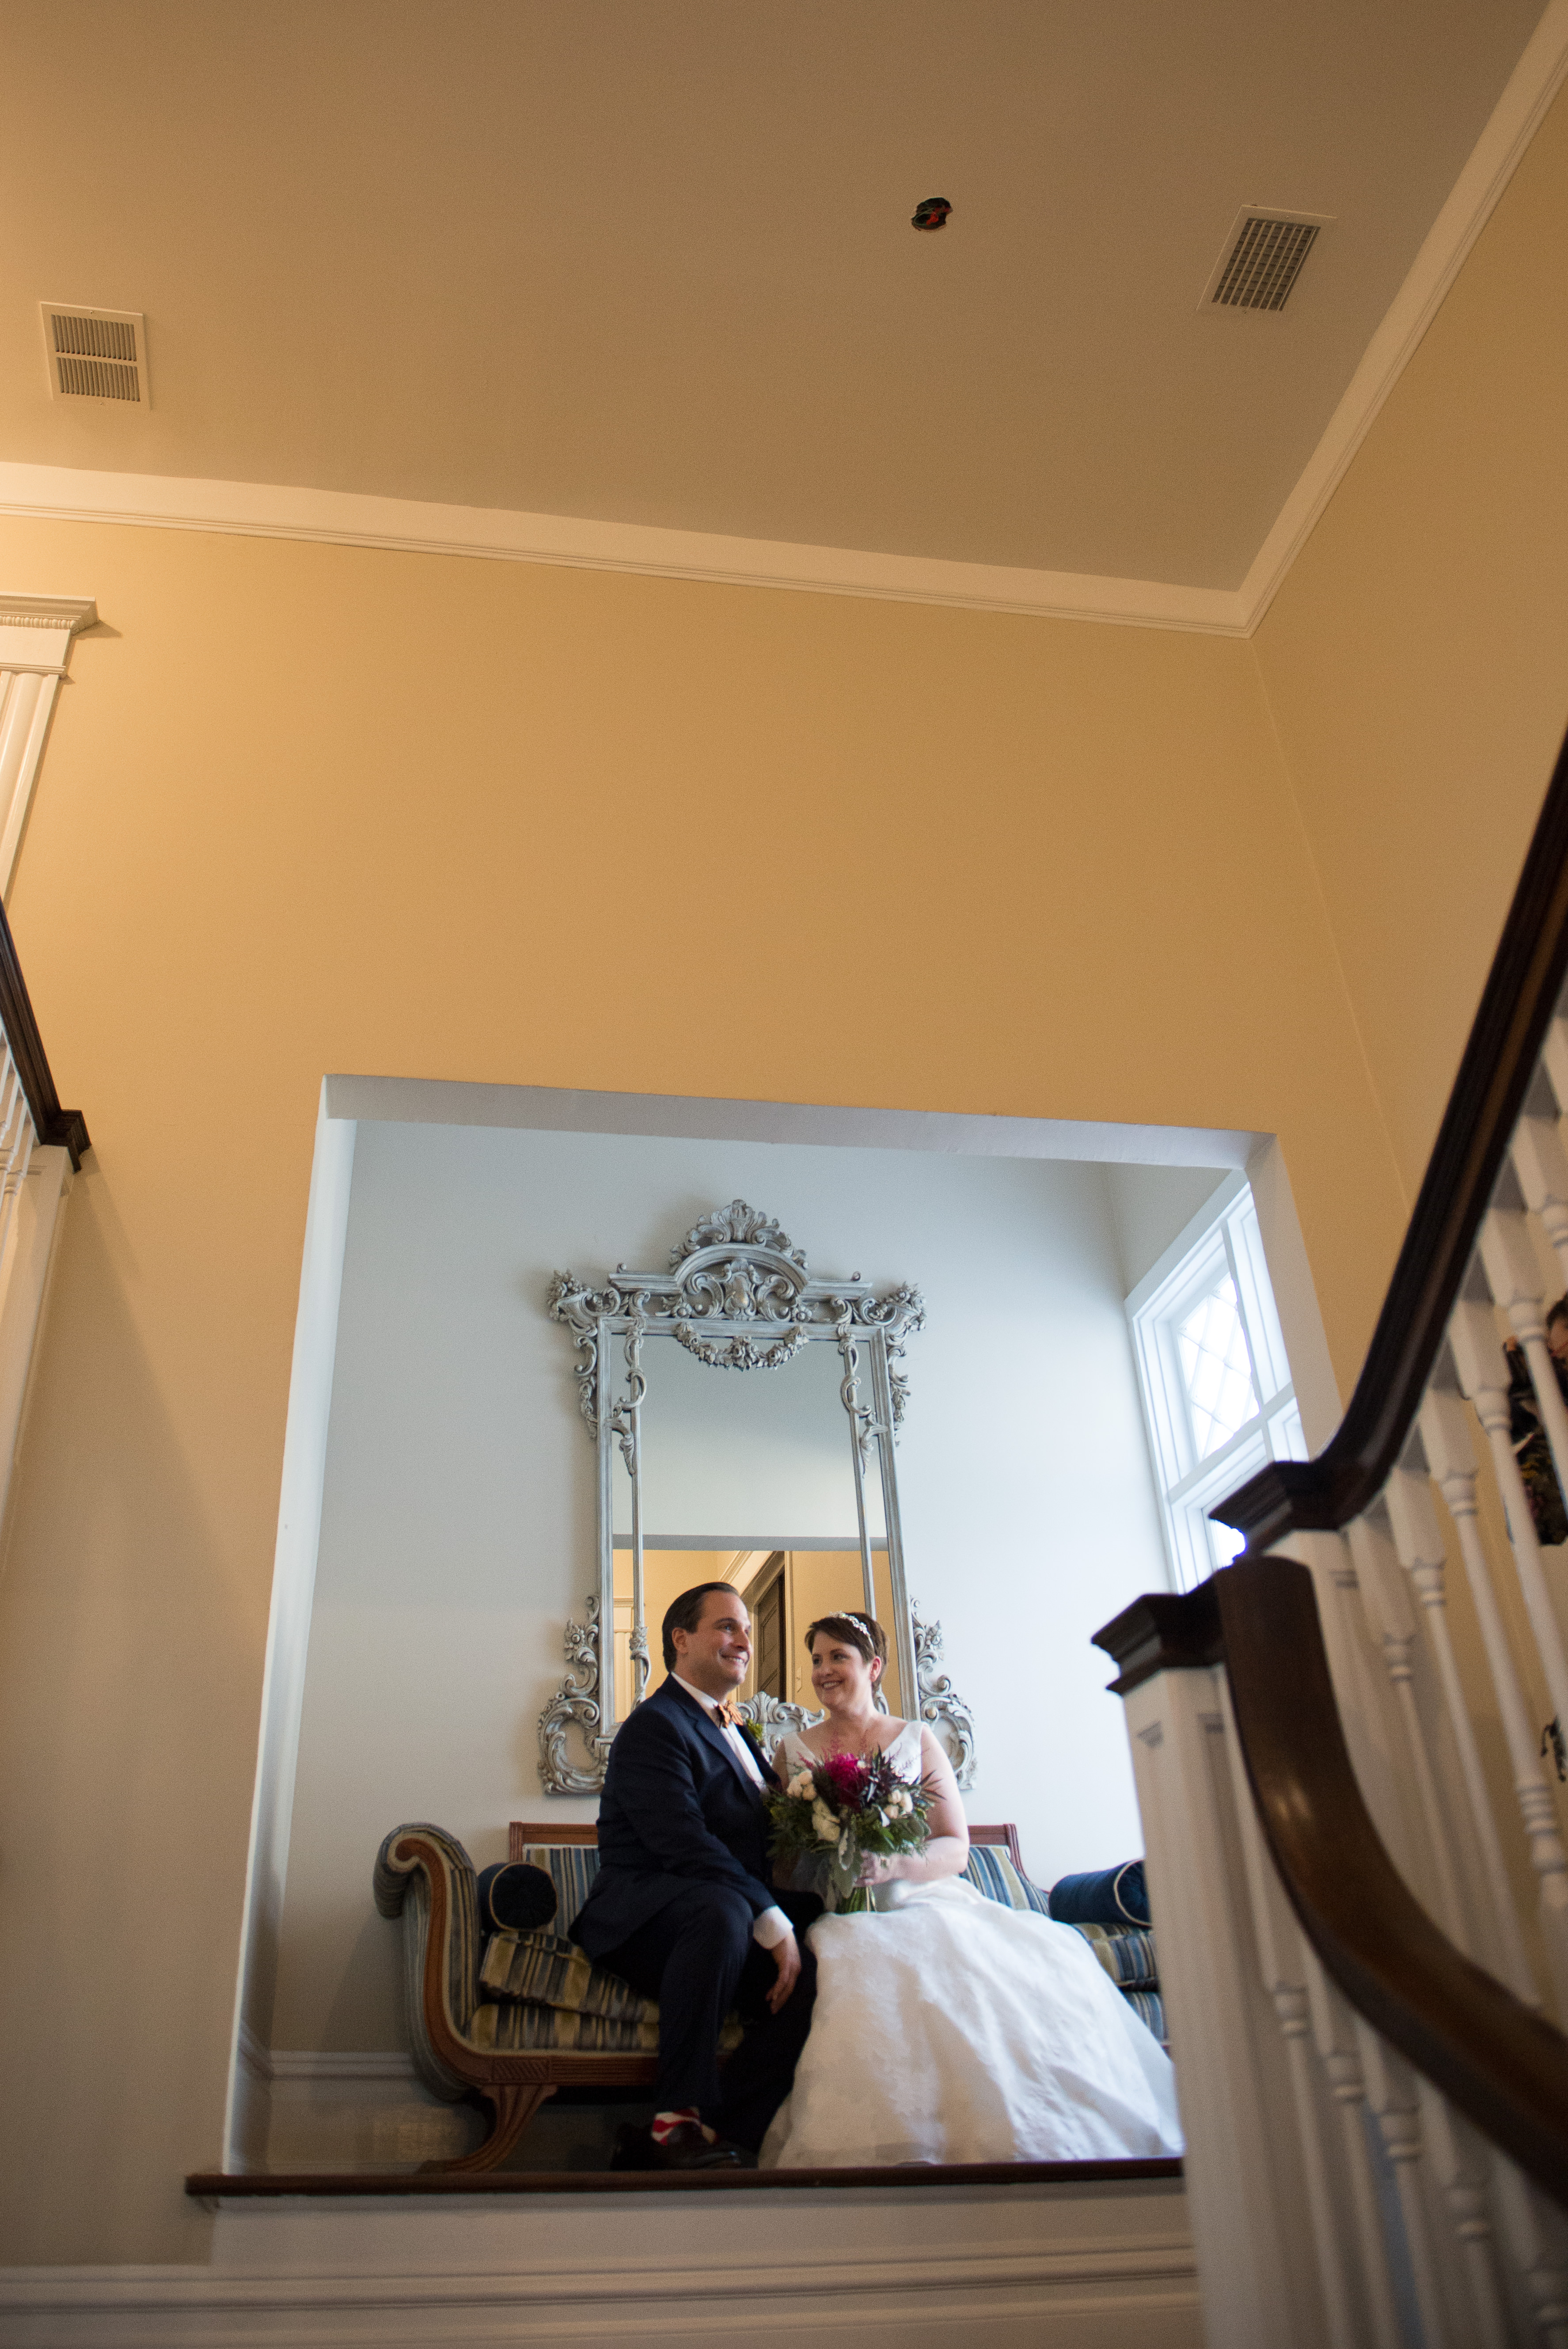 Florida Bride and Groom Wedding Portrait | Tampa Bay Wedding Photographer Carrie Wildes Photography | Hyde Park Wedding Venue The Orlo House